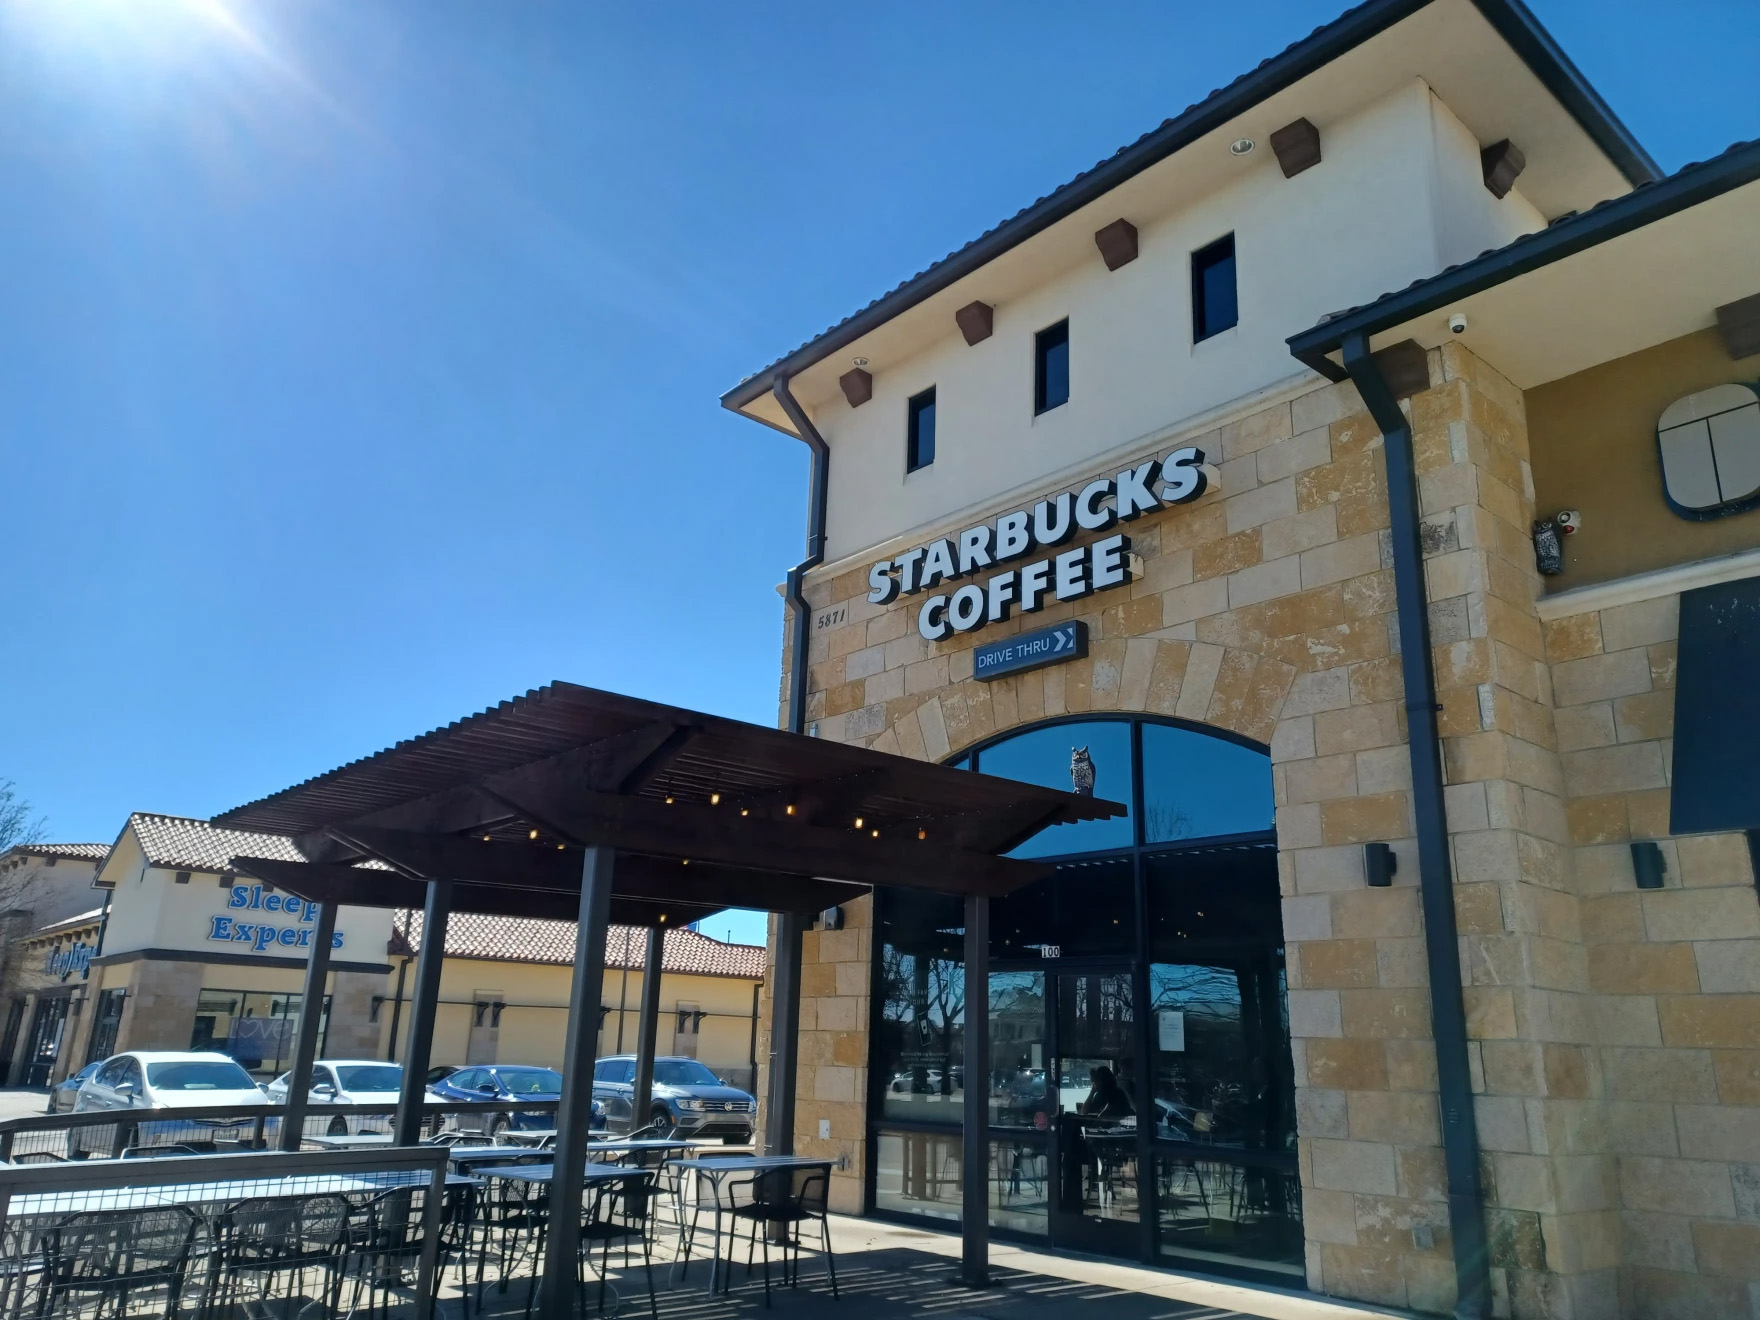 The exterior of a Starbucks location is seen.